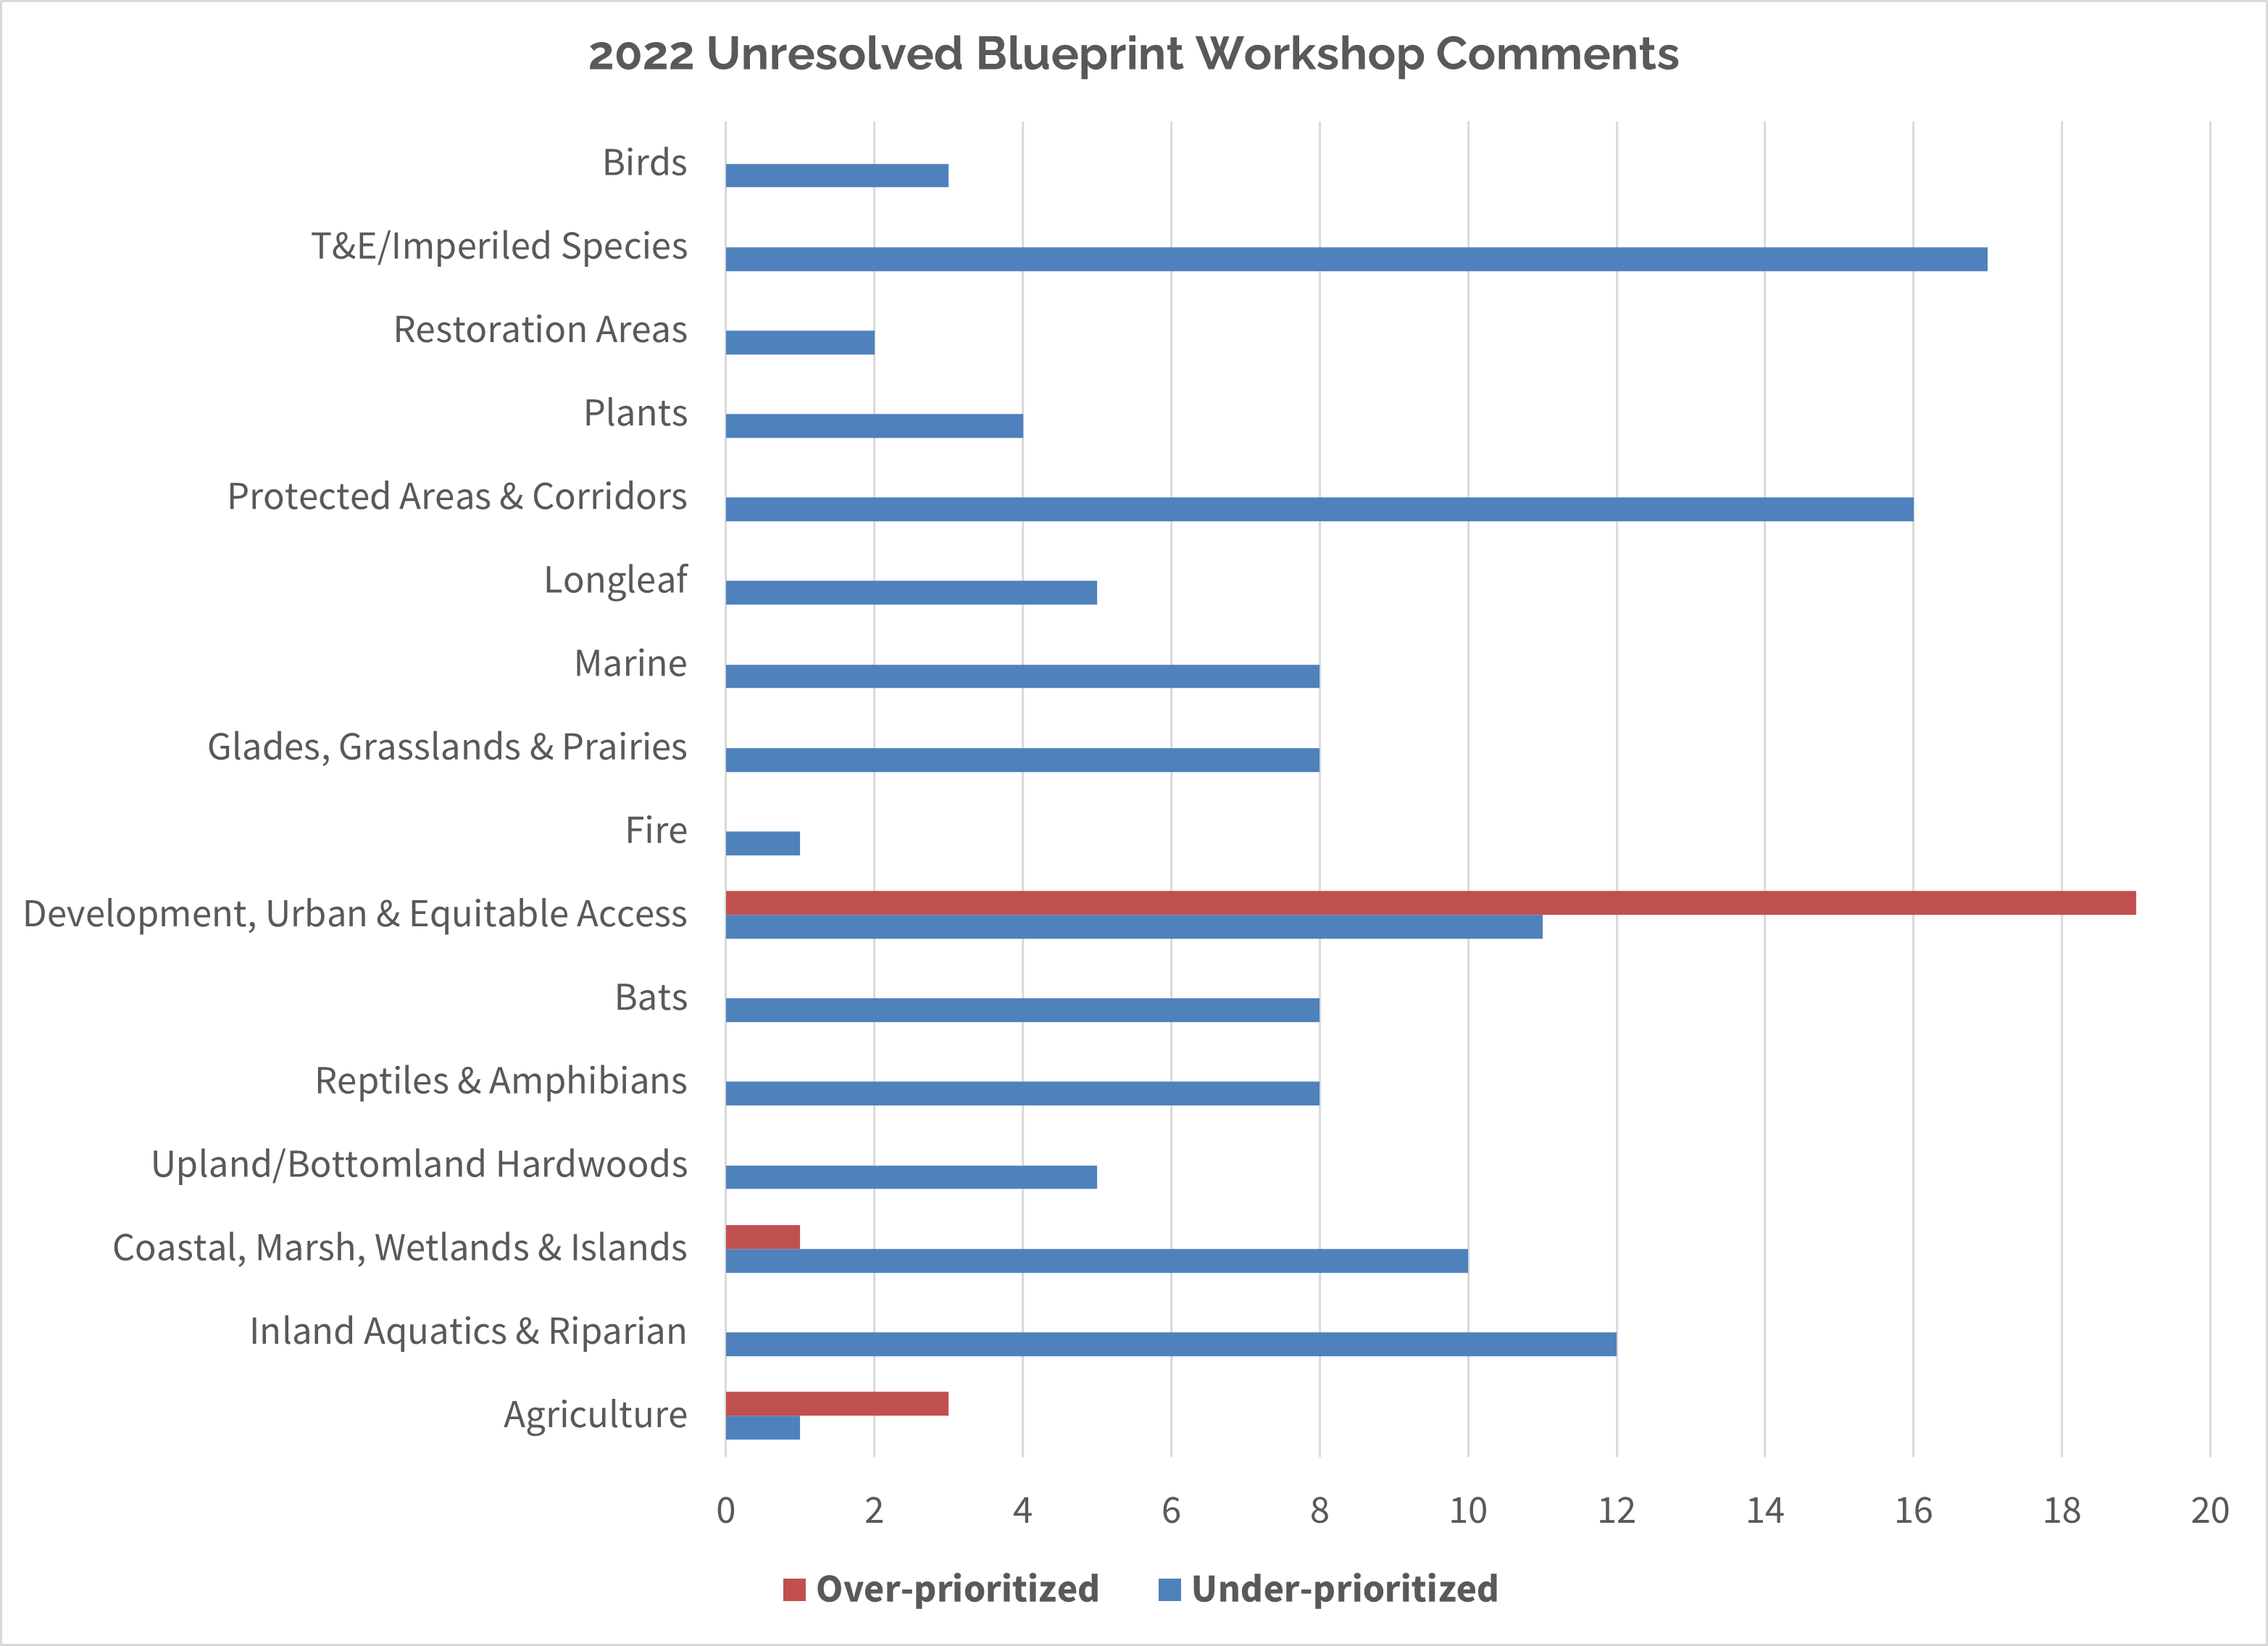 Horizontal bar chart showing the number of comments that remained unresolved after post-workshop Blueprint improvements